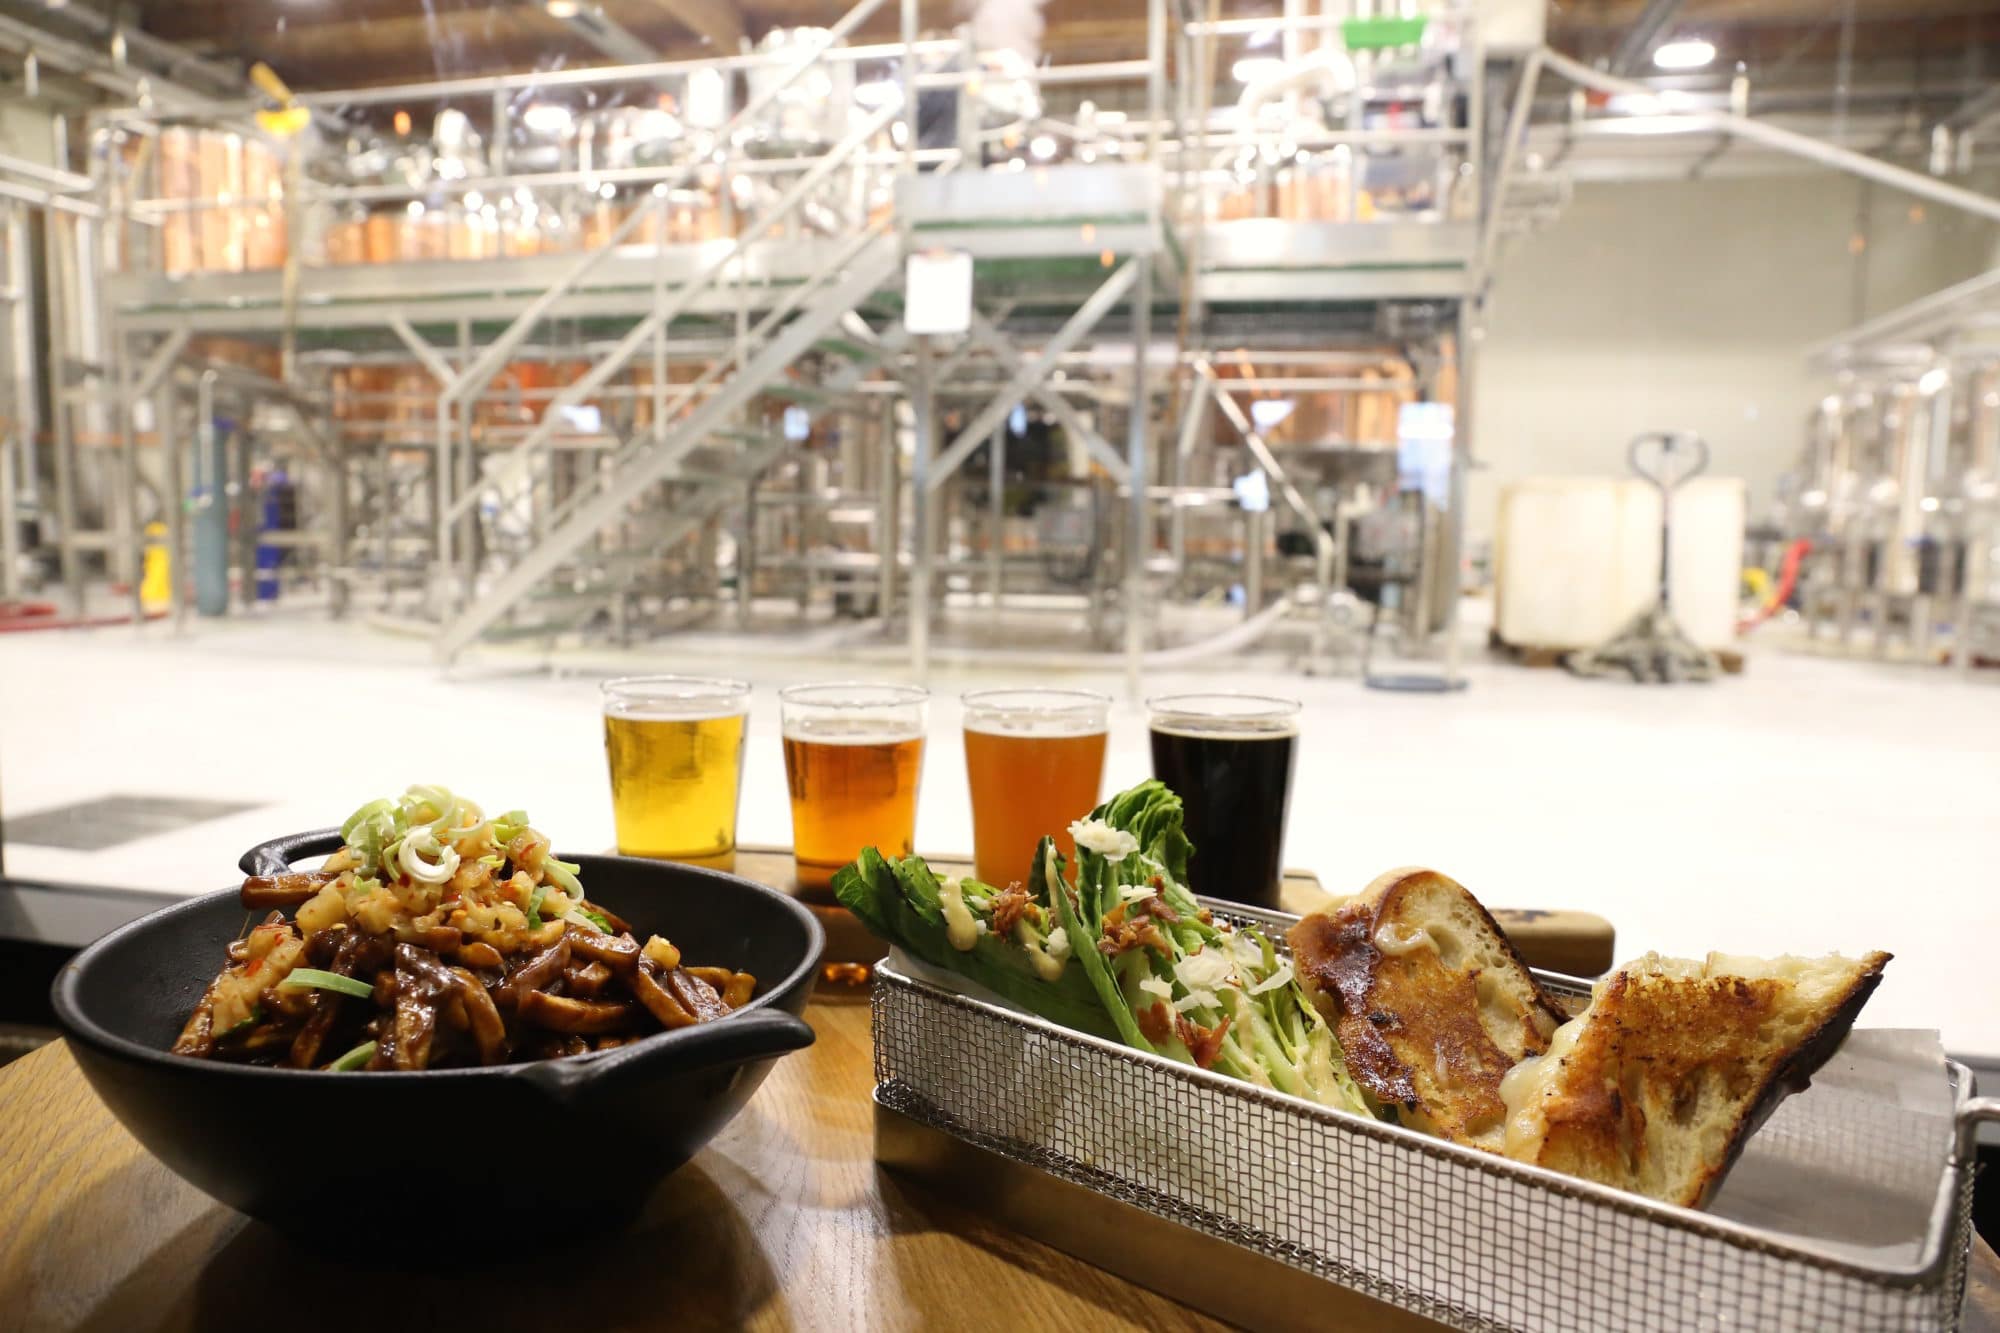 Vancouver Breweries: Big Rock Urban Brewery's restaurant serves poutine and grilled cheese.